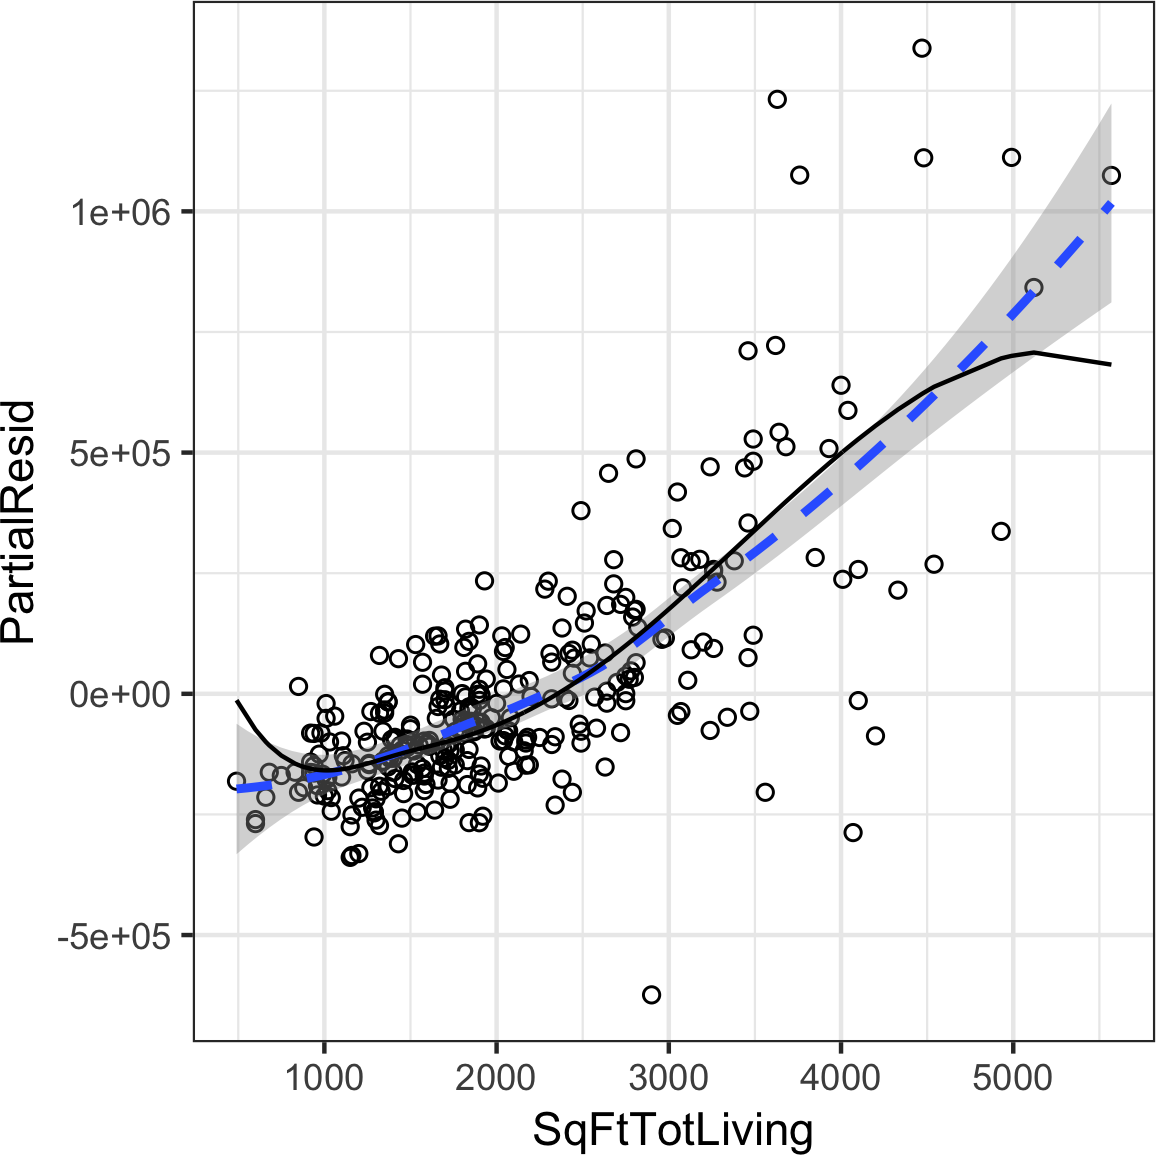 A spline regression fit for the variable SqFtTotLiving (solid line) compared to a smooth (dashed line)